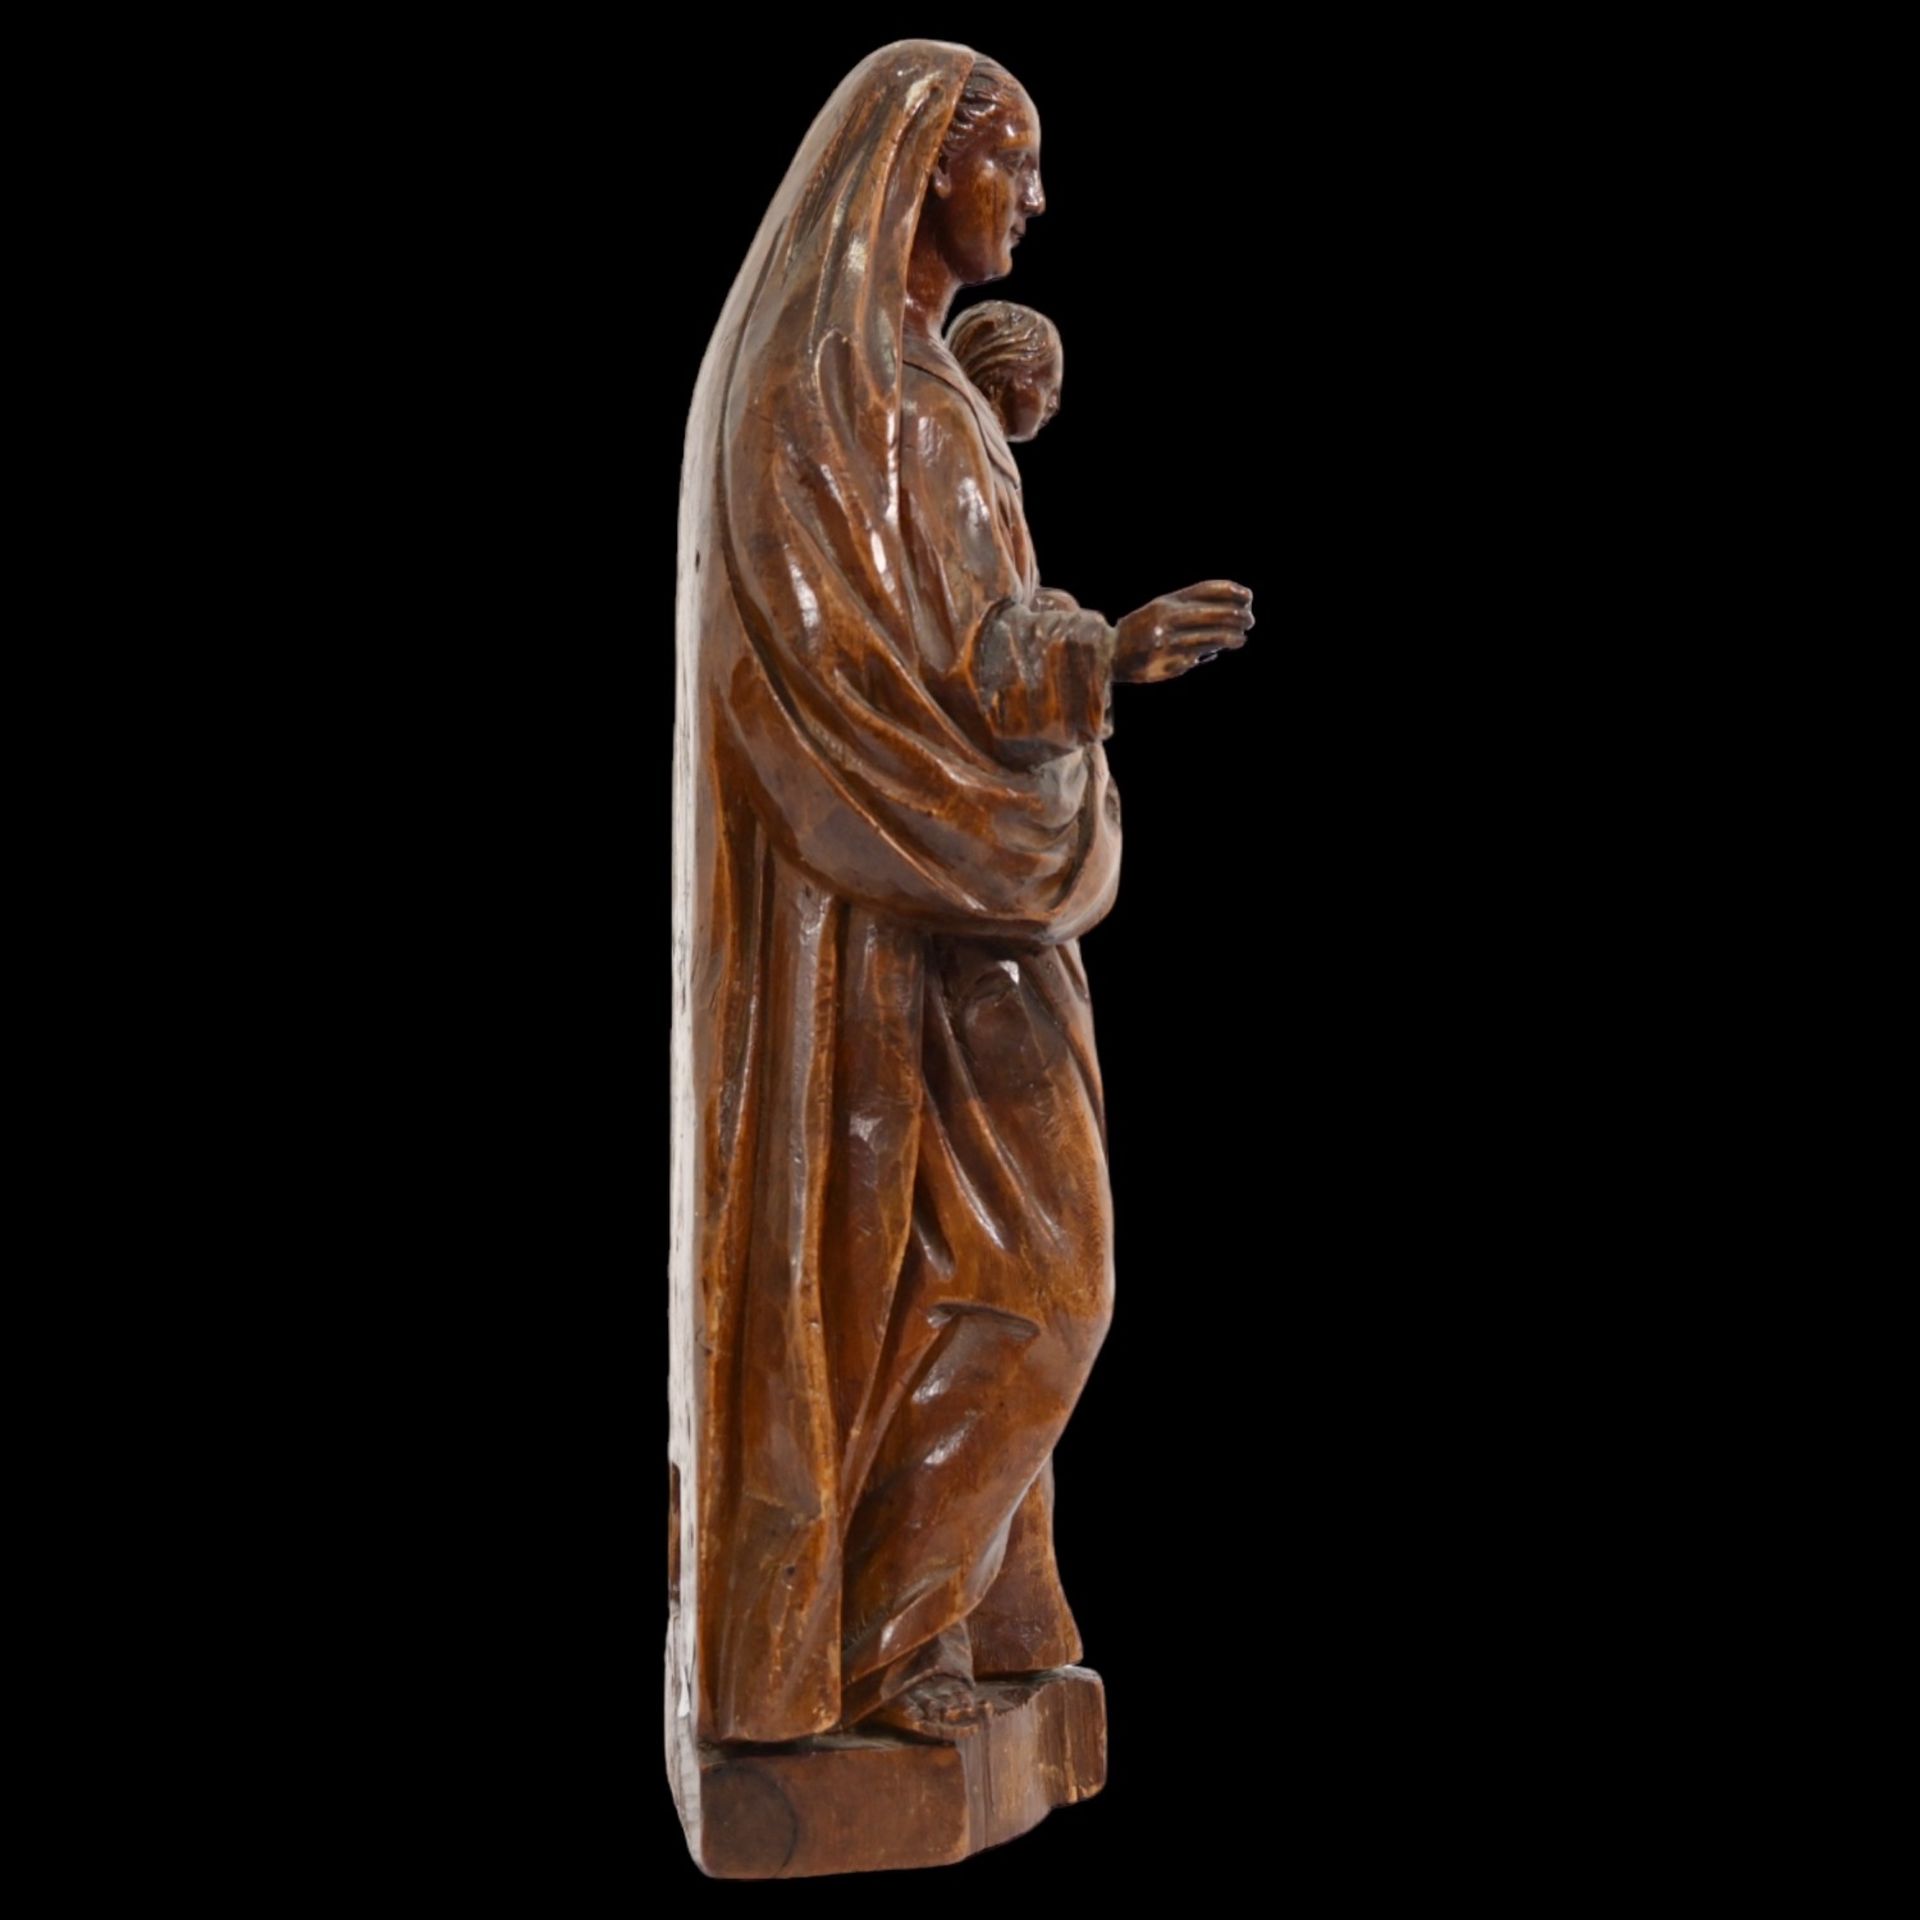 Magnificent Wooden sculpture, Virgin Mary with Child Jesus, France 19th century. - Image 5 of 8